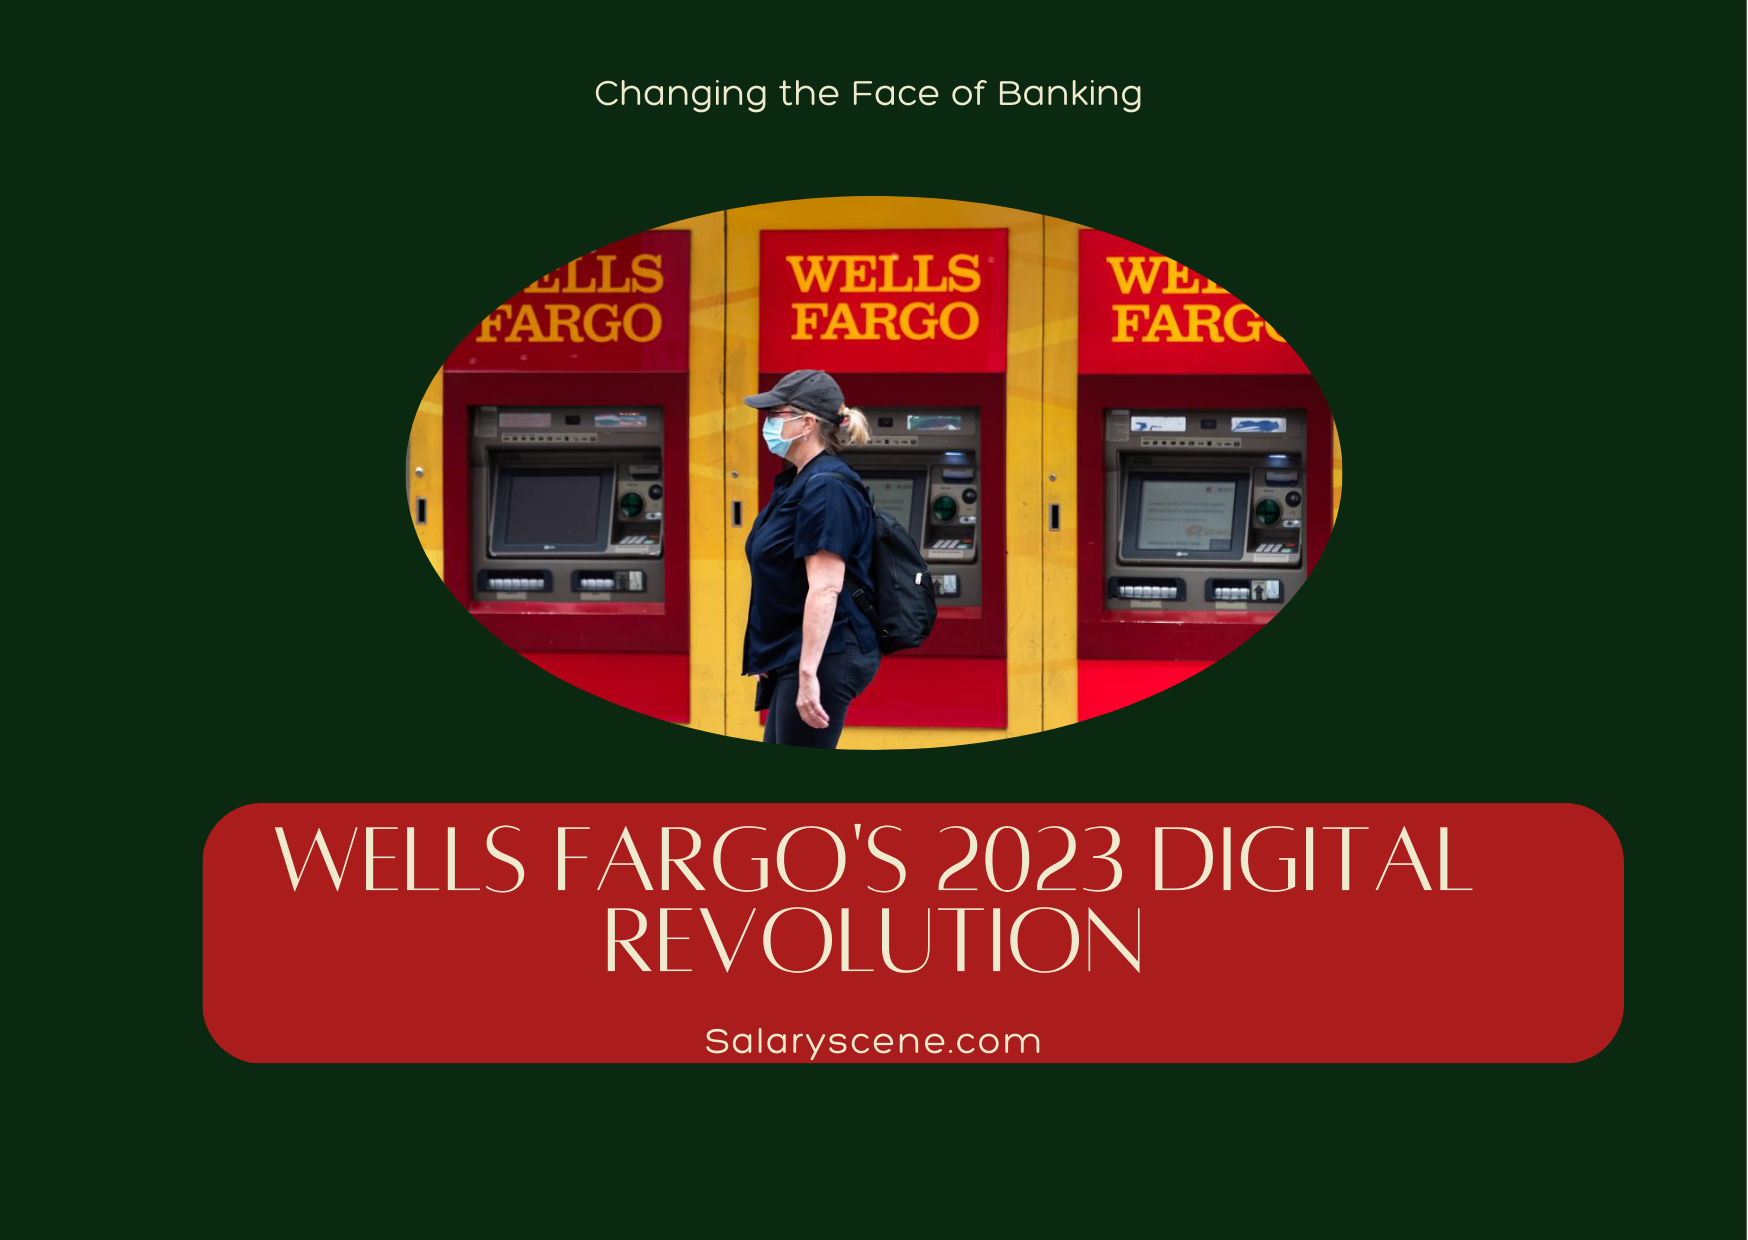 Wells Fargo's 2023 Digital Revolution: Changing the Face of Banking